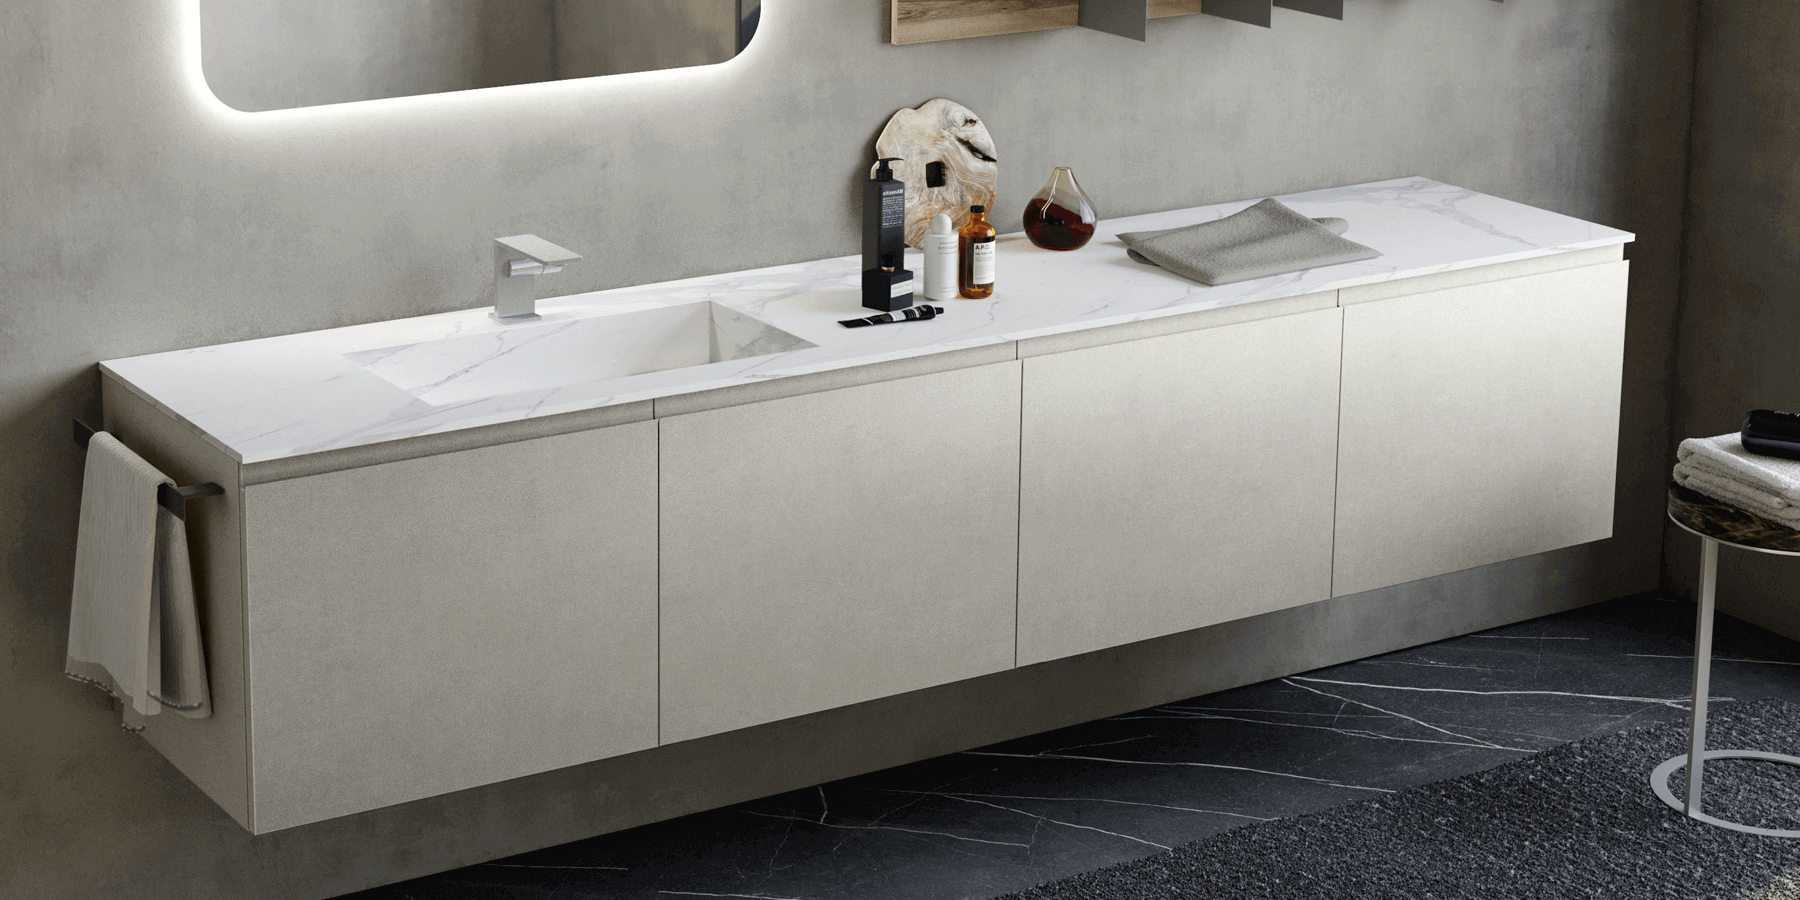 Luxury white porcelain countertop with a single basin sink